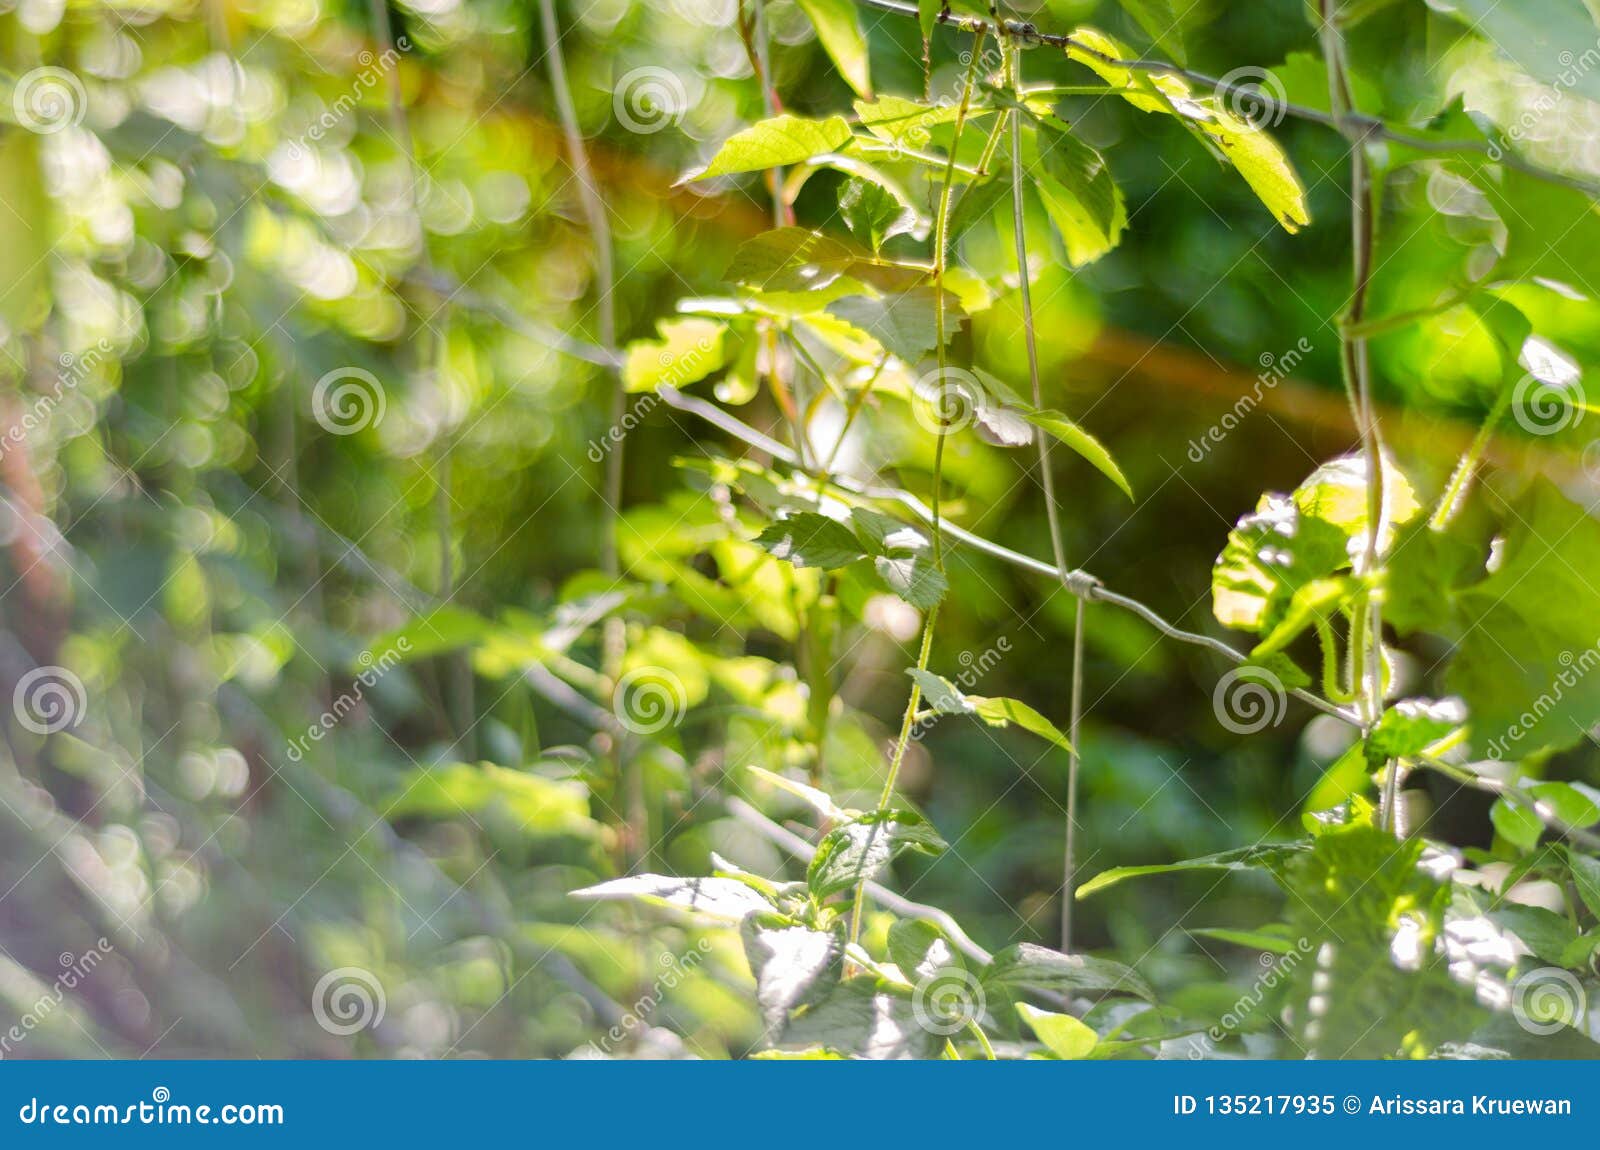 Nature Green Bokeh Sunlight Blur Leaves Background. Stock Image - Image of  effect, blurred: 135217935